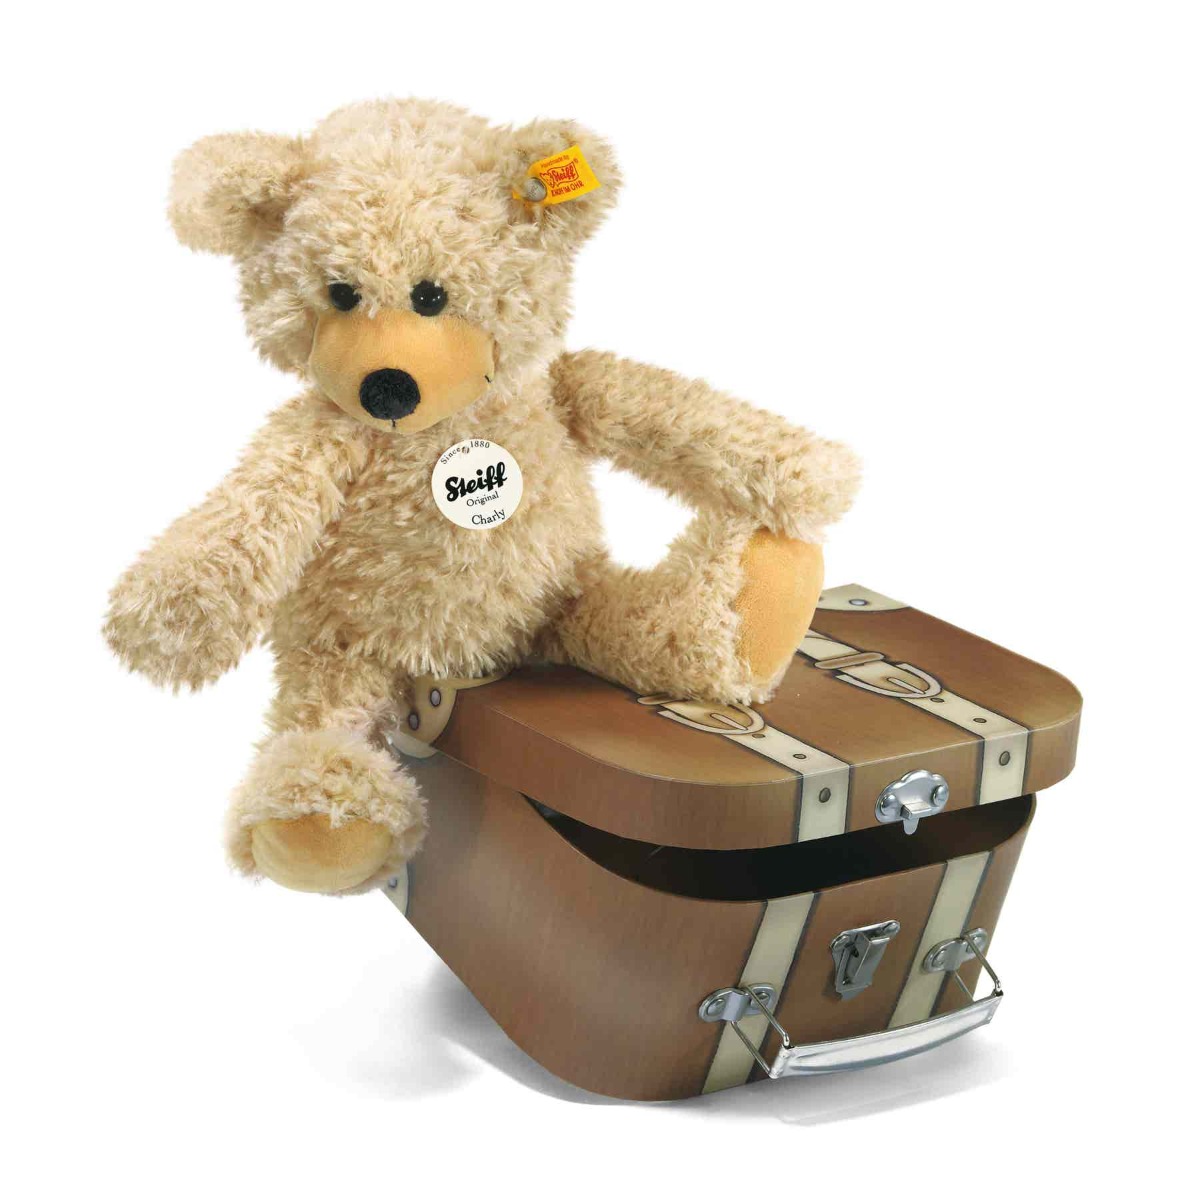 Мягкая игрушка Steiff Charly Dangling Teddy Bear in Suitcase бежевый 1 10pcs luggage tag plastic baggage tags women men boarding shipping suitcase id address name holder bag label travel accessory